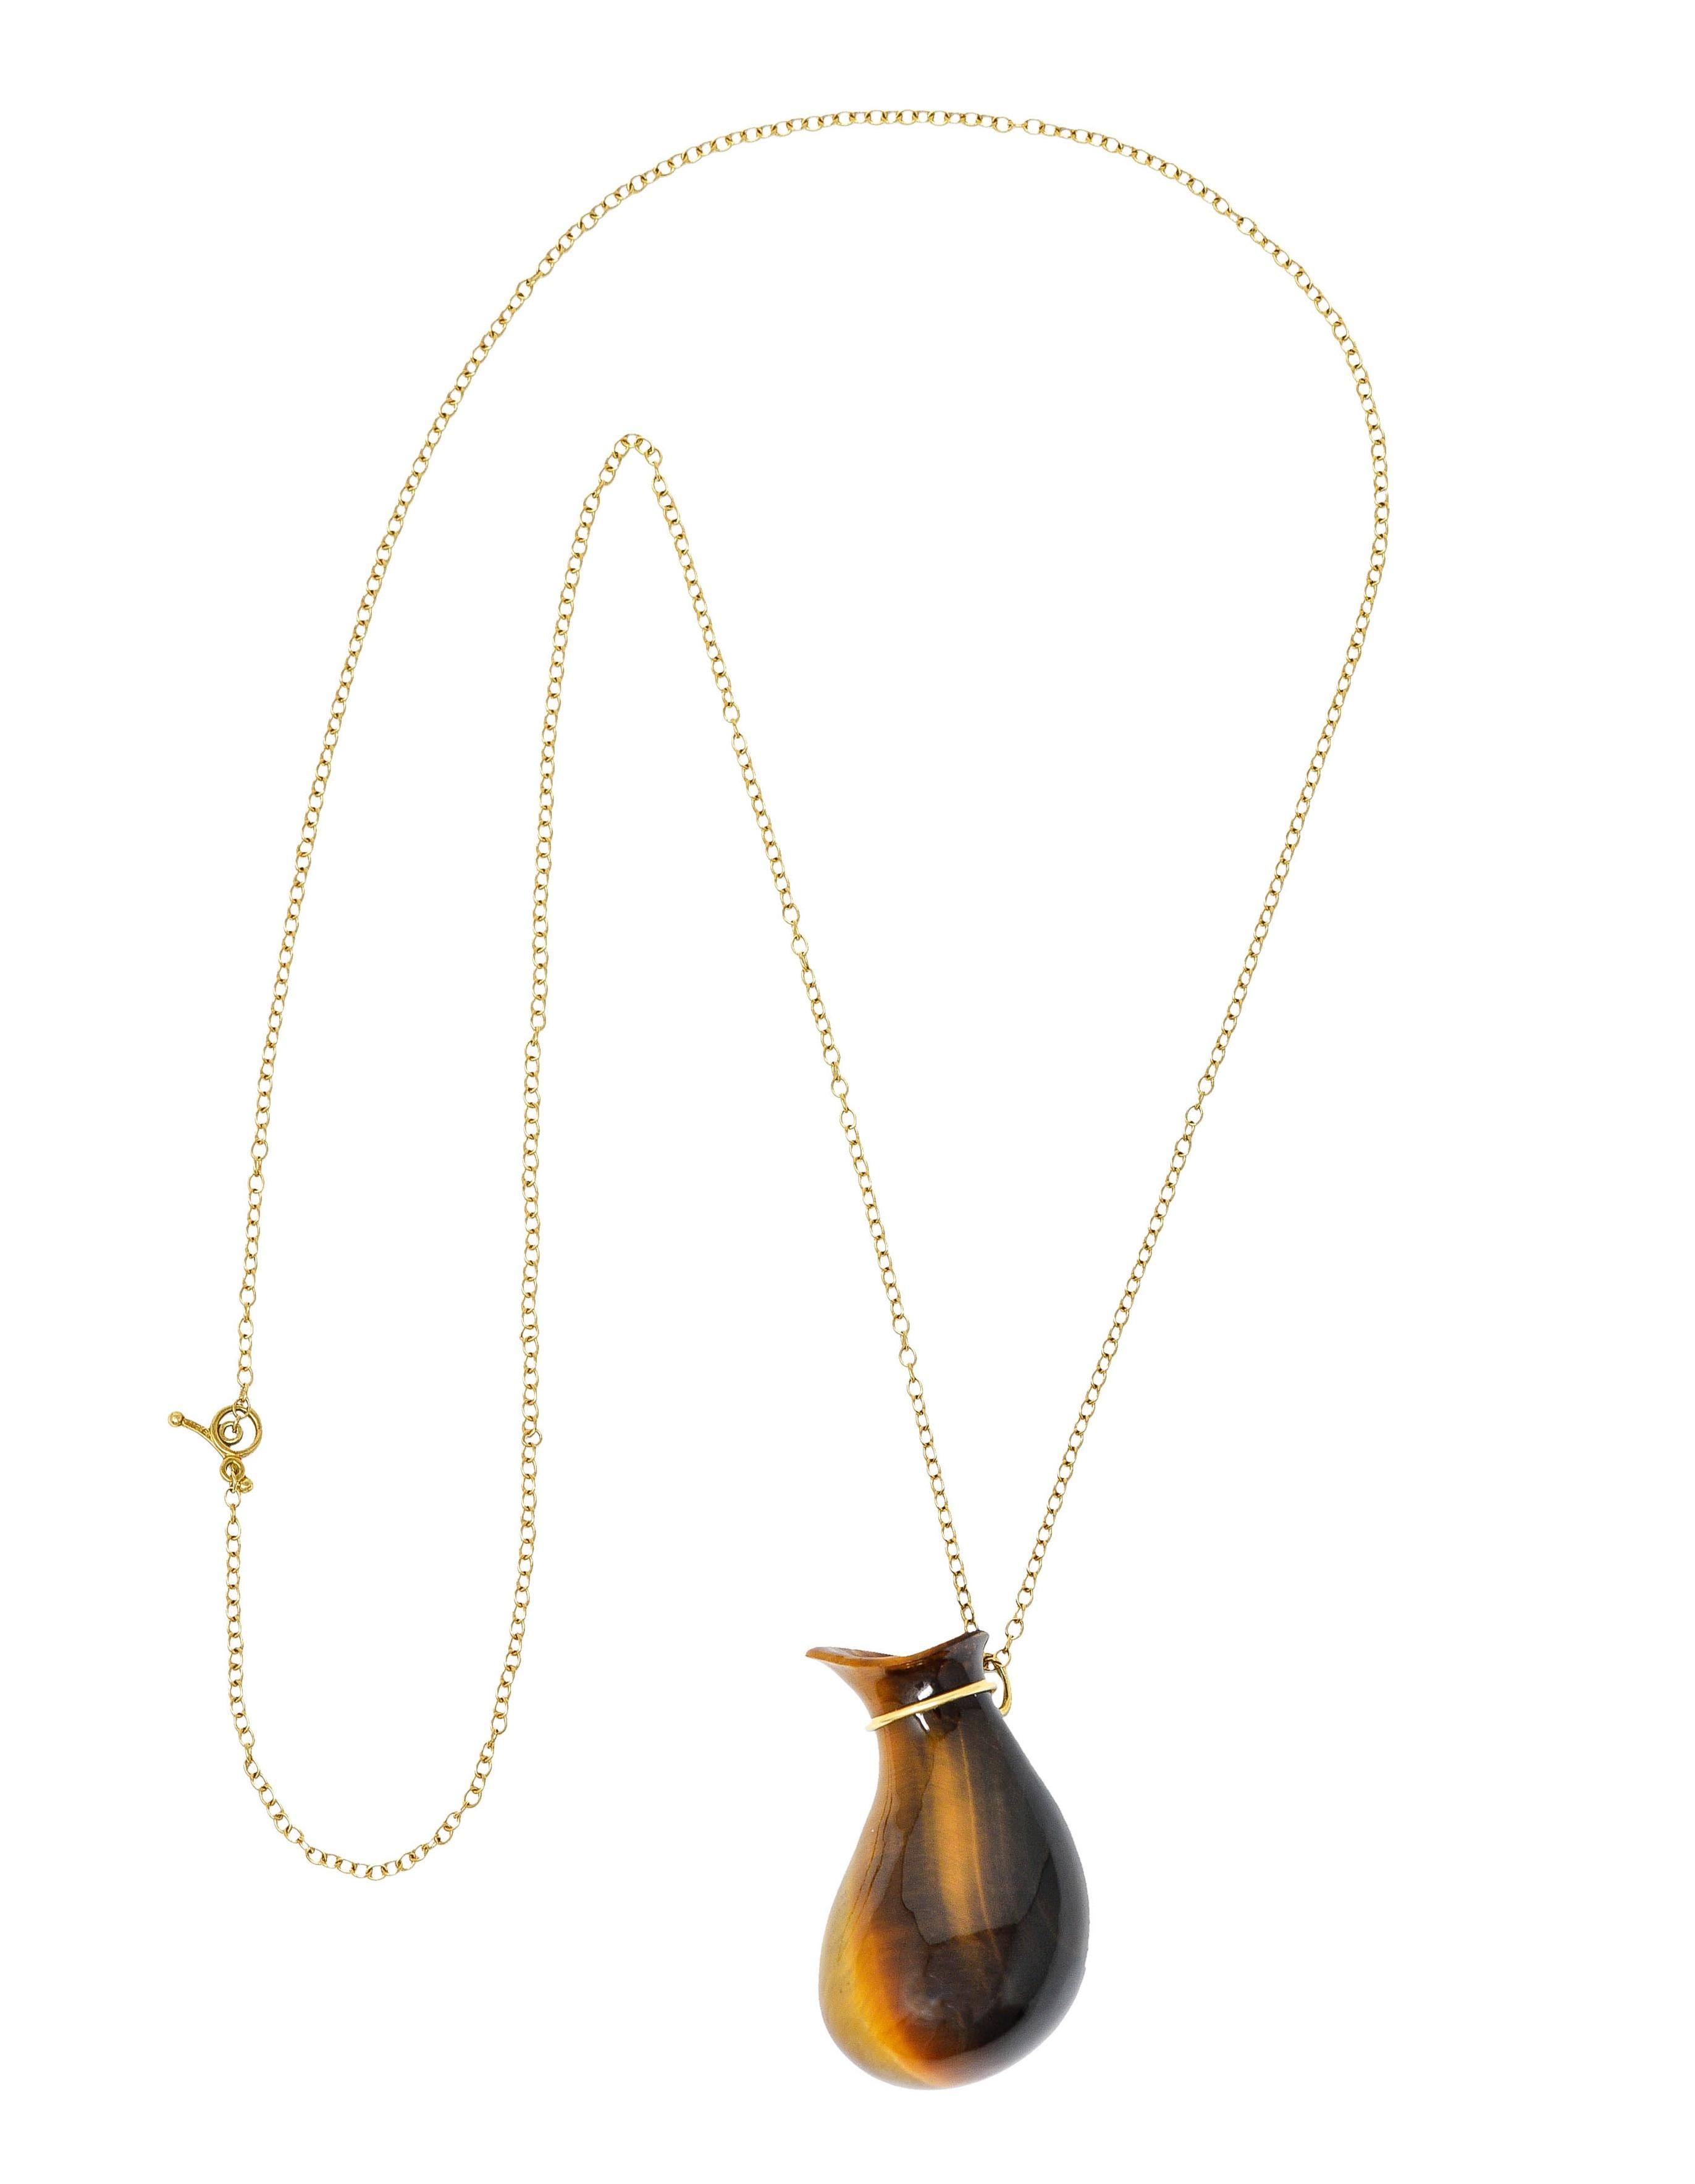  Featuring the iconic bottle jug pendant - fantastically carved from tiger's eye quartz

Opaque with brown to yellowish orange banded color while exhibiting very strong chatoyancy

Suspending from a classic cable chain necklace completed by a toggle